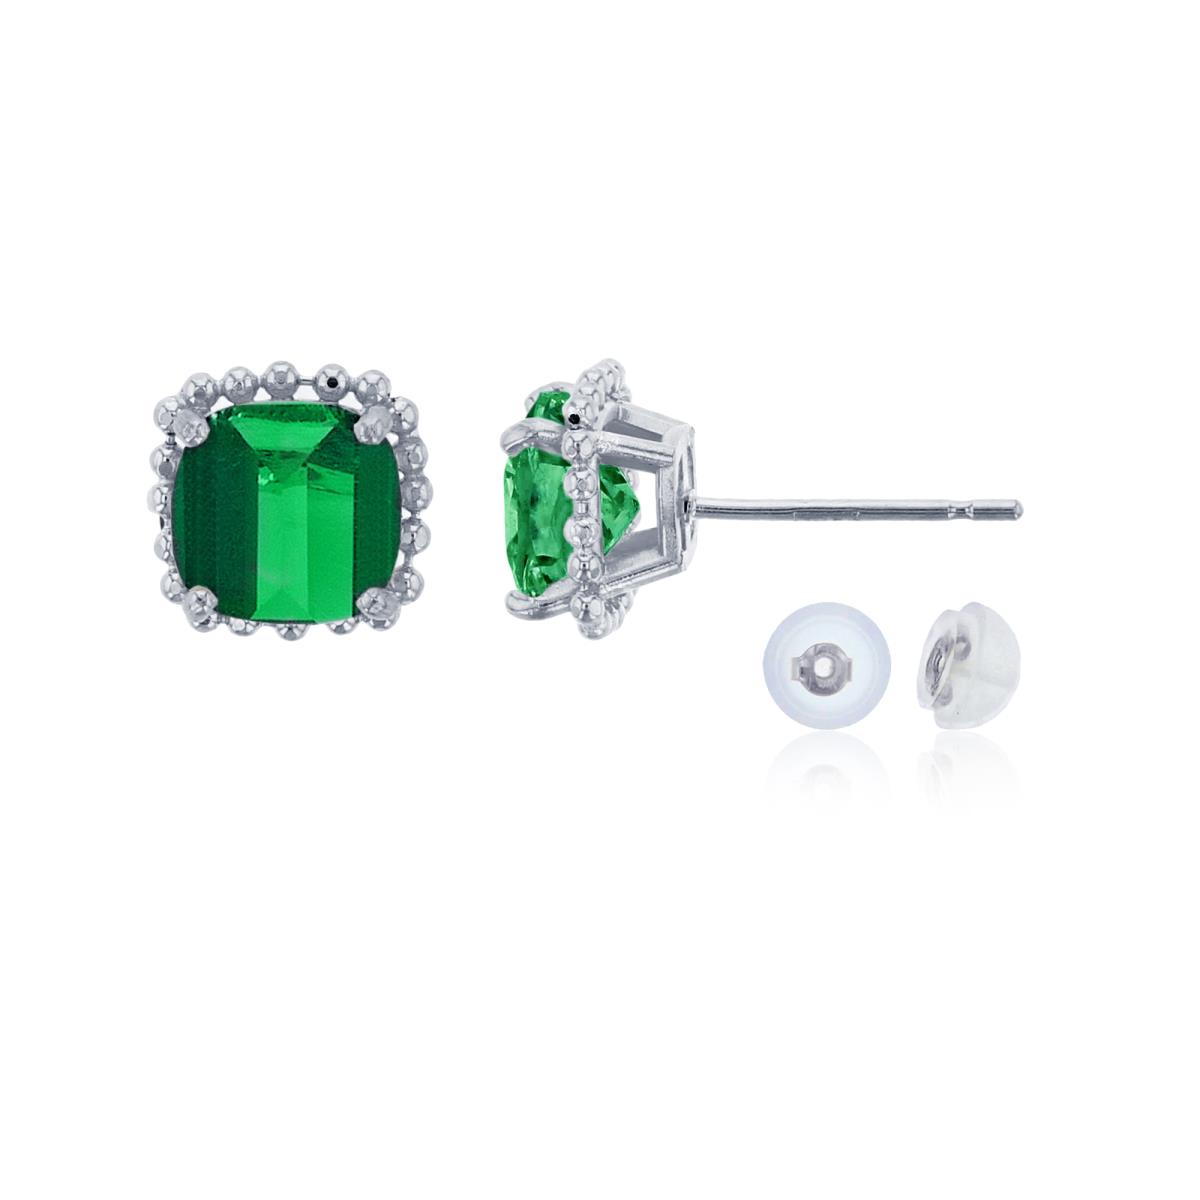 14K White Gold 6x6mm Cushion Cut Created Emerald Bead Frame Stud Earring with Silicone Back